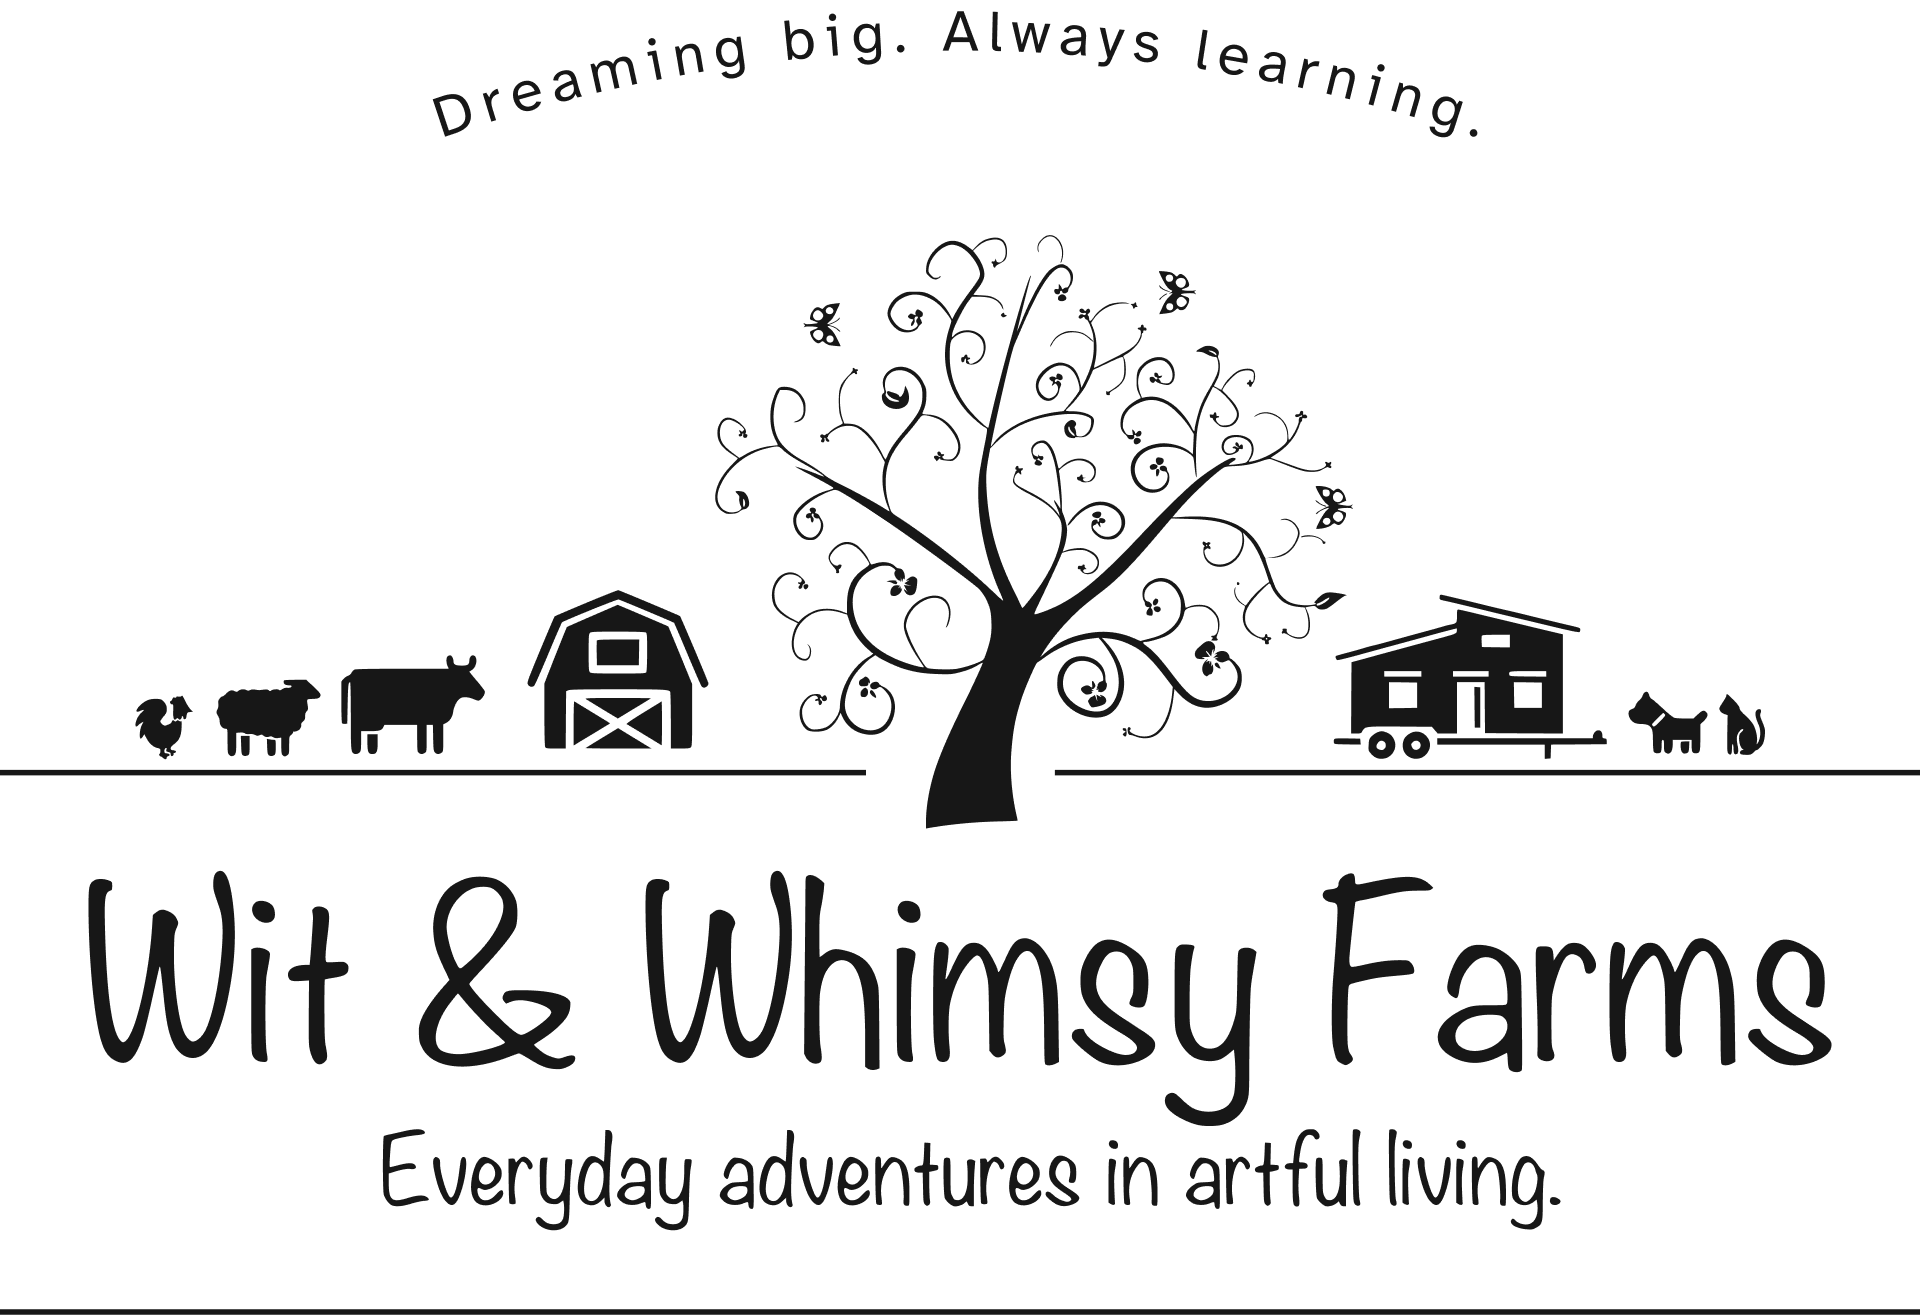 Wit & Whimsy Farms. Everyday adventures in artful living.